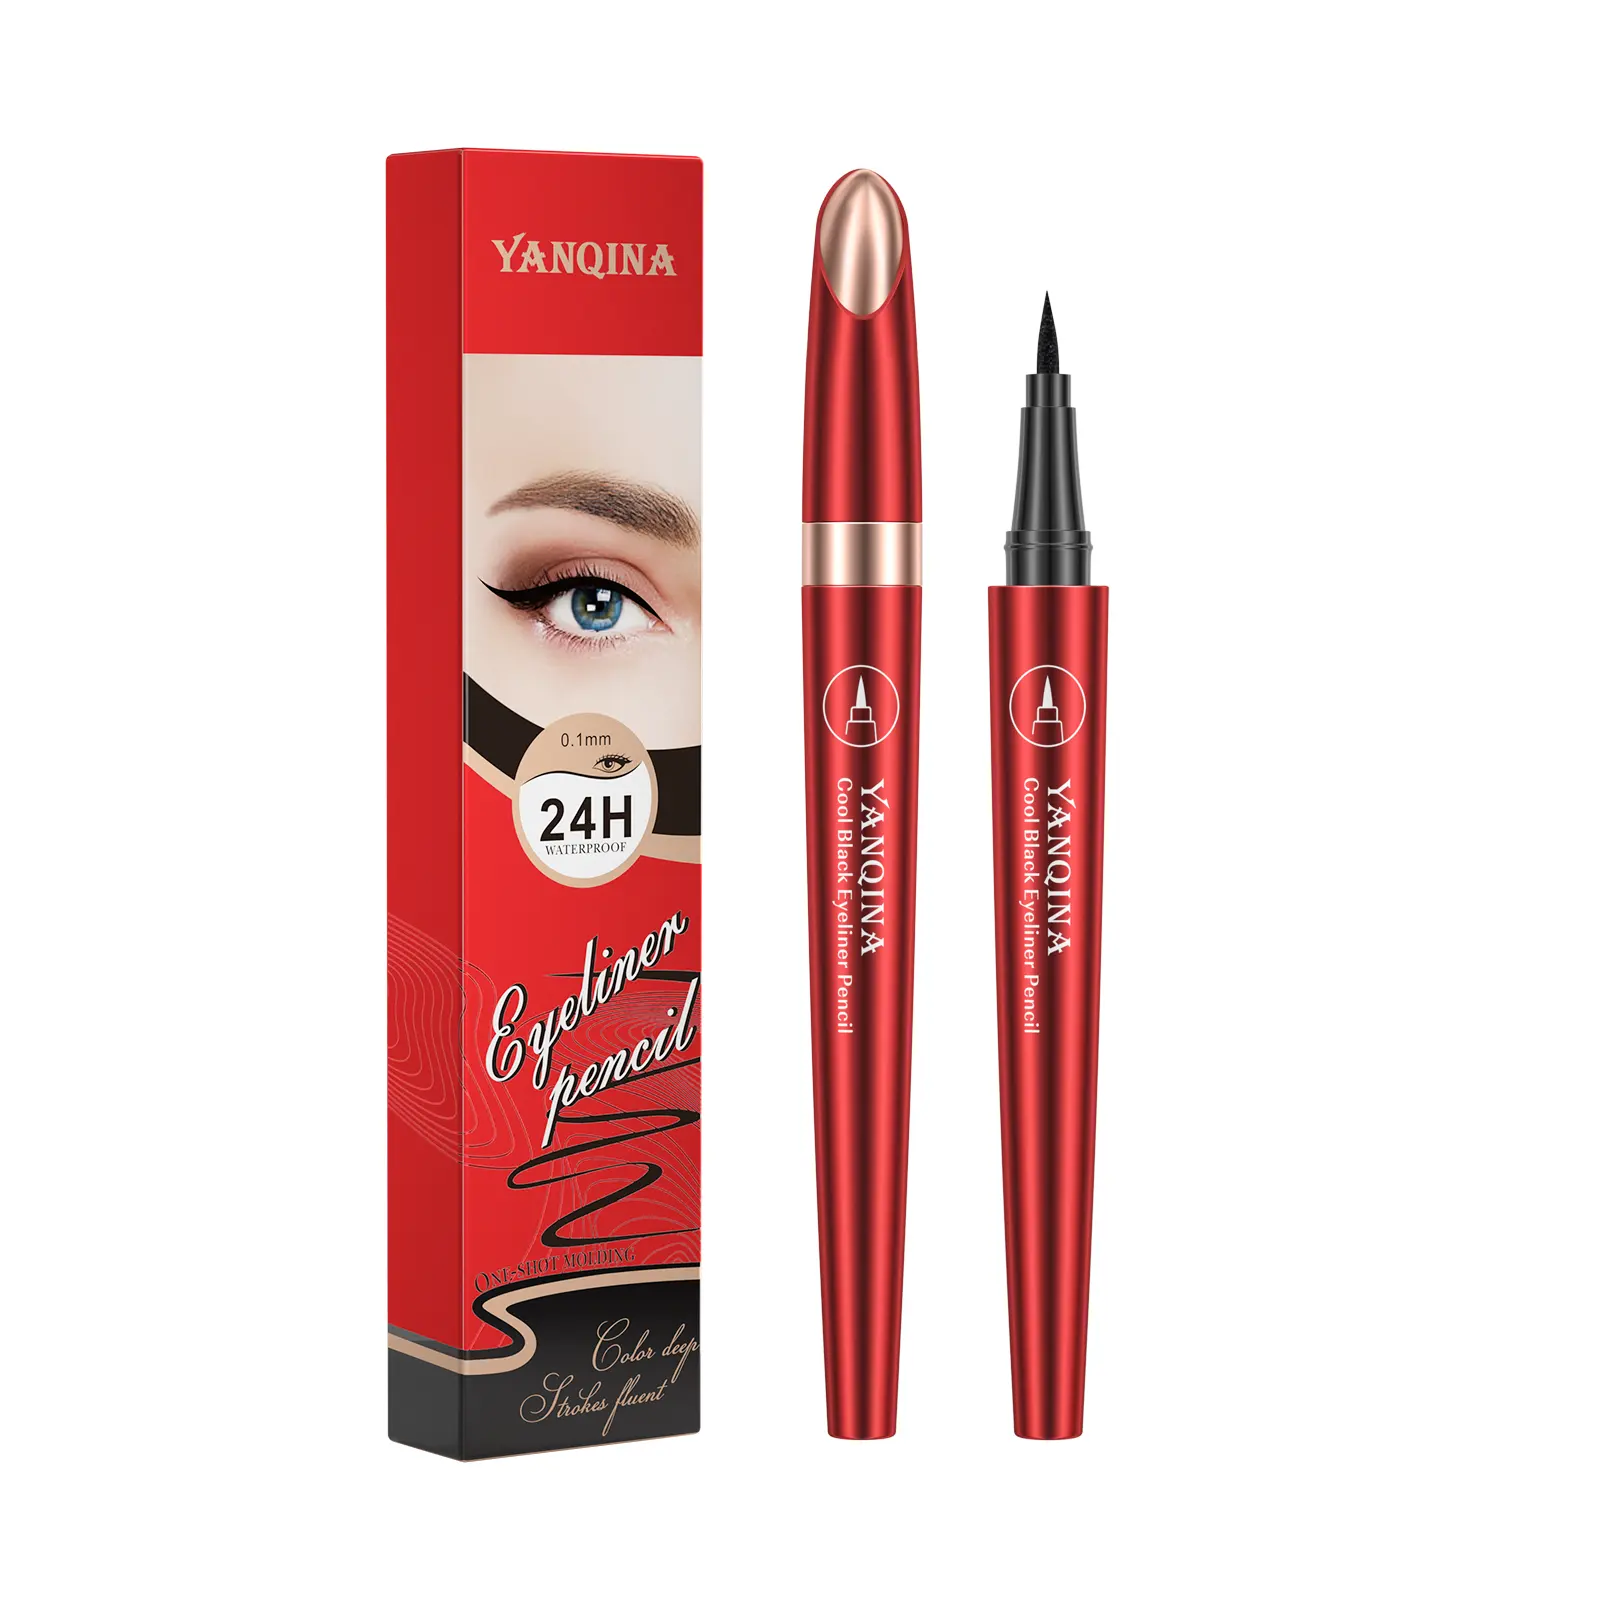 24H quick dry waterproof Eyeliner Extremely fine liquid eyeliner pencil smooth and easy to draw